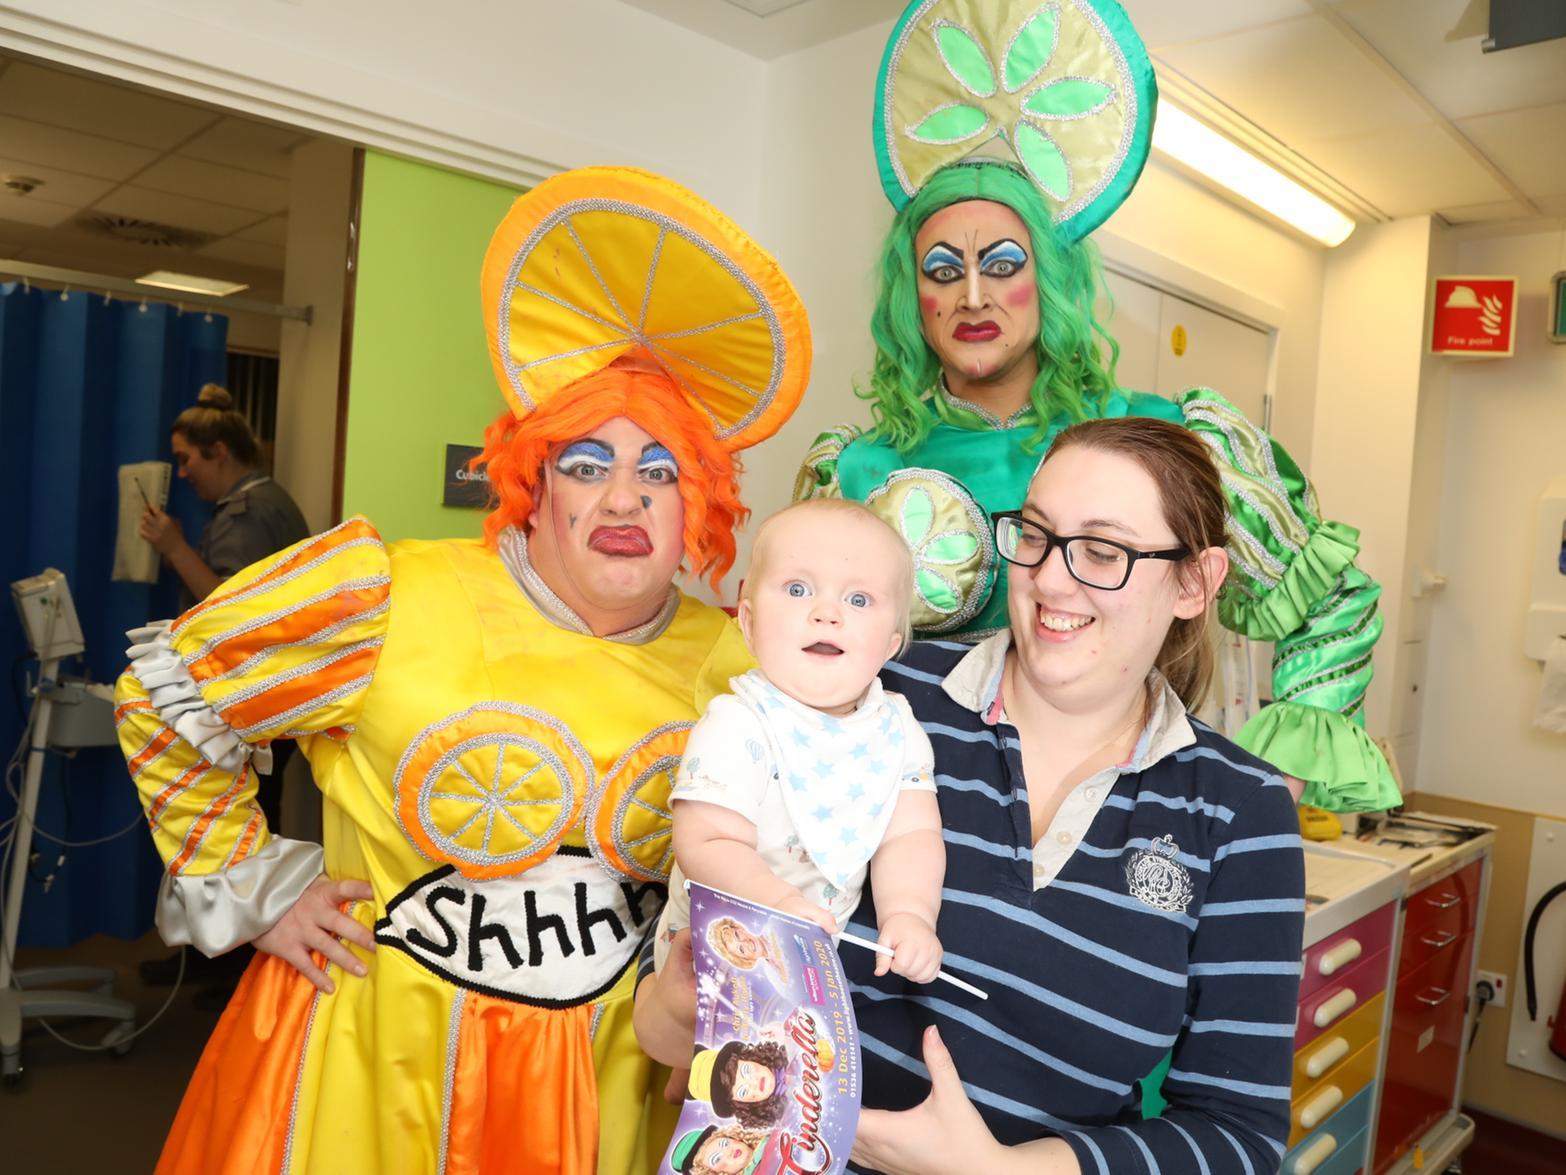 Sam's mum Hannah said the care on Skylark ward had been "fantastic". She said: "The treatment here has been fantastic. You cannot fault them, they haven't been able to do enough for us." Hannah said they were going home that evening.